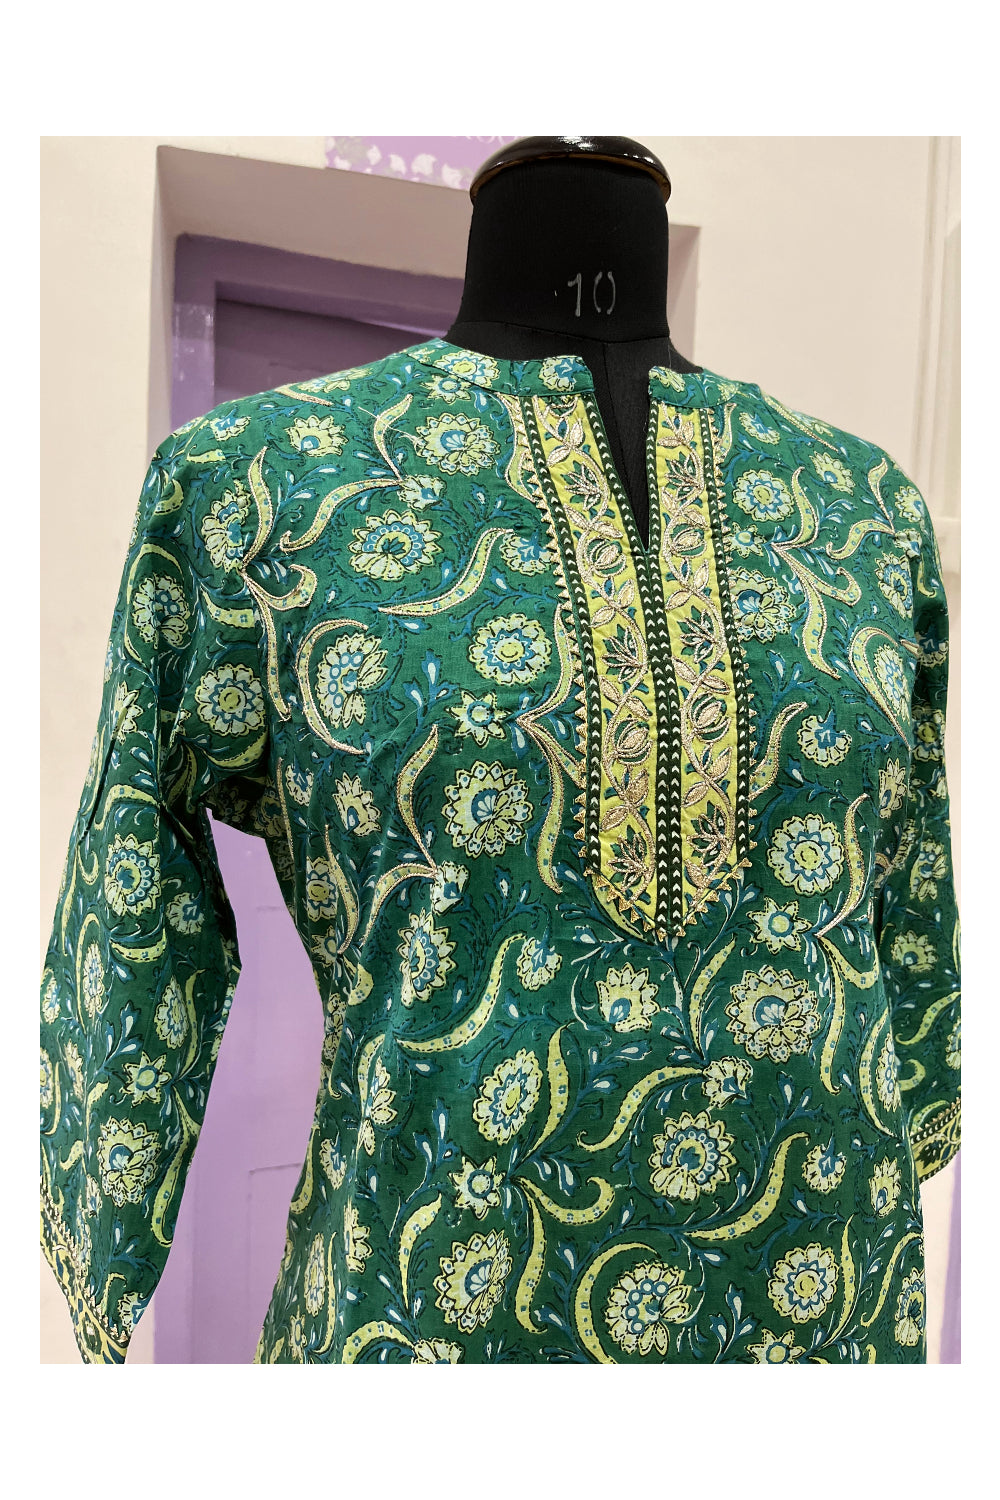 Southloom Stitched Cotton Green Salwar Set with Printed Designs